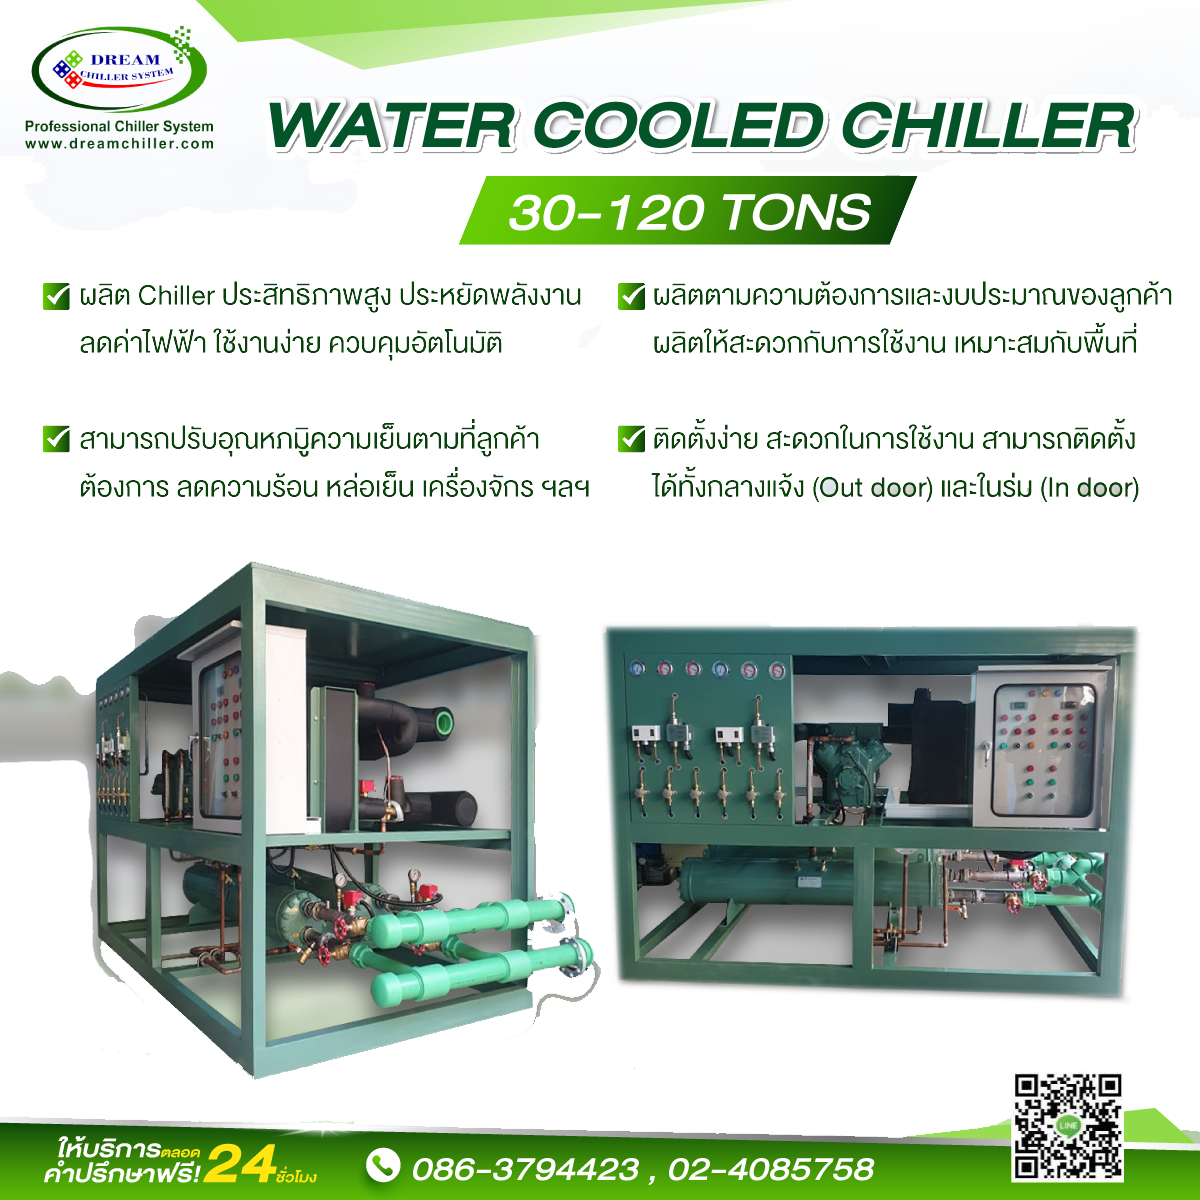 WATER  COOLED  CHILLER 30 - 160 Tons.